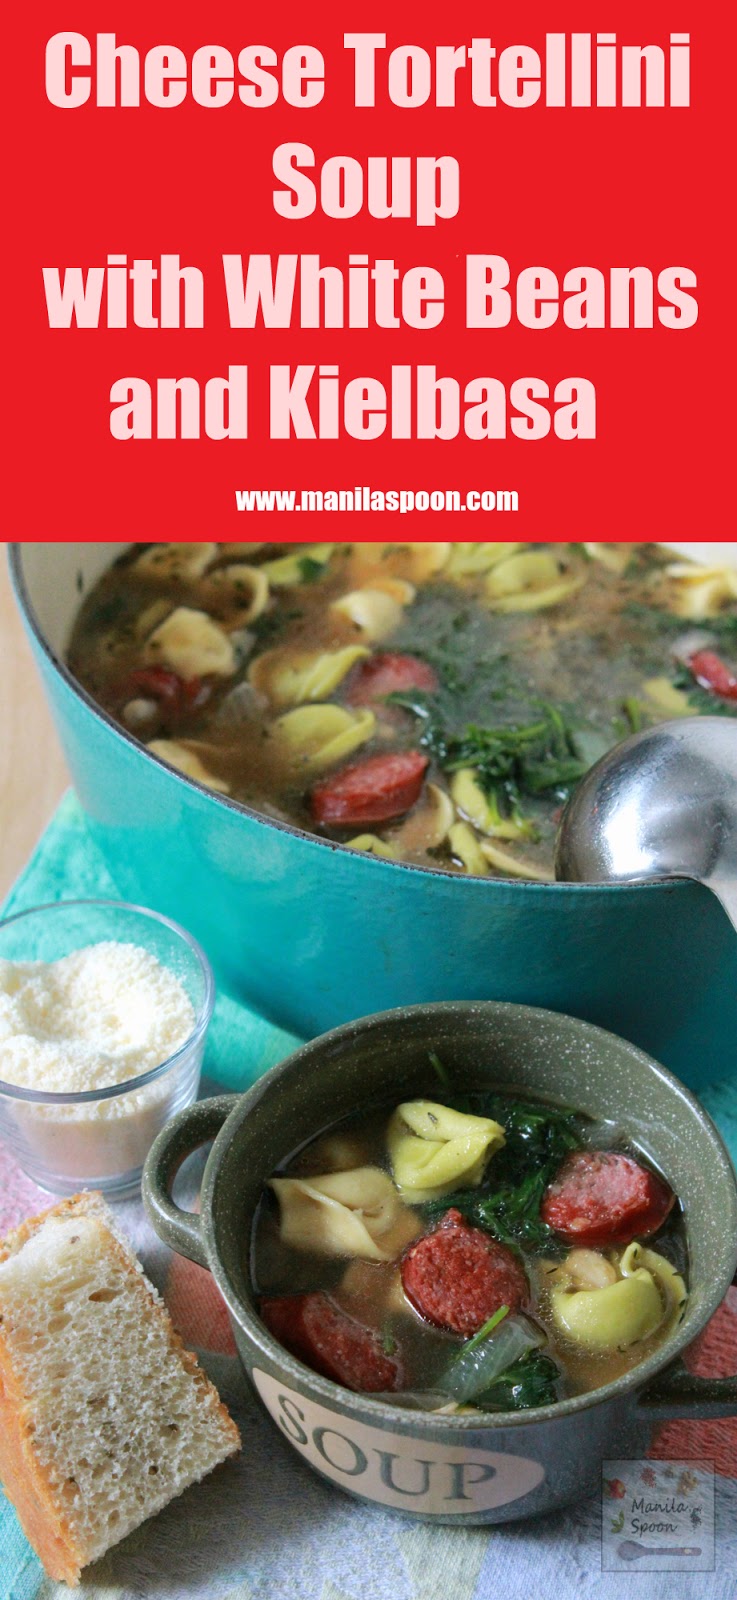 In 30 minutes you can serve your family a hearty and delicious soup! Easy-peasy yumminess in a bowl!